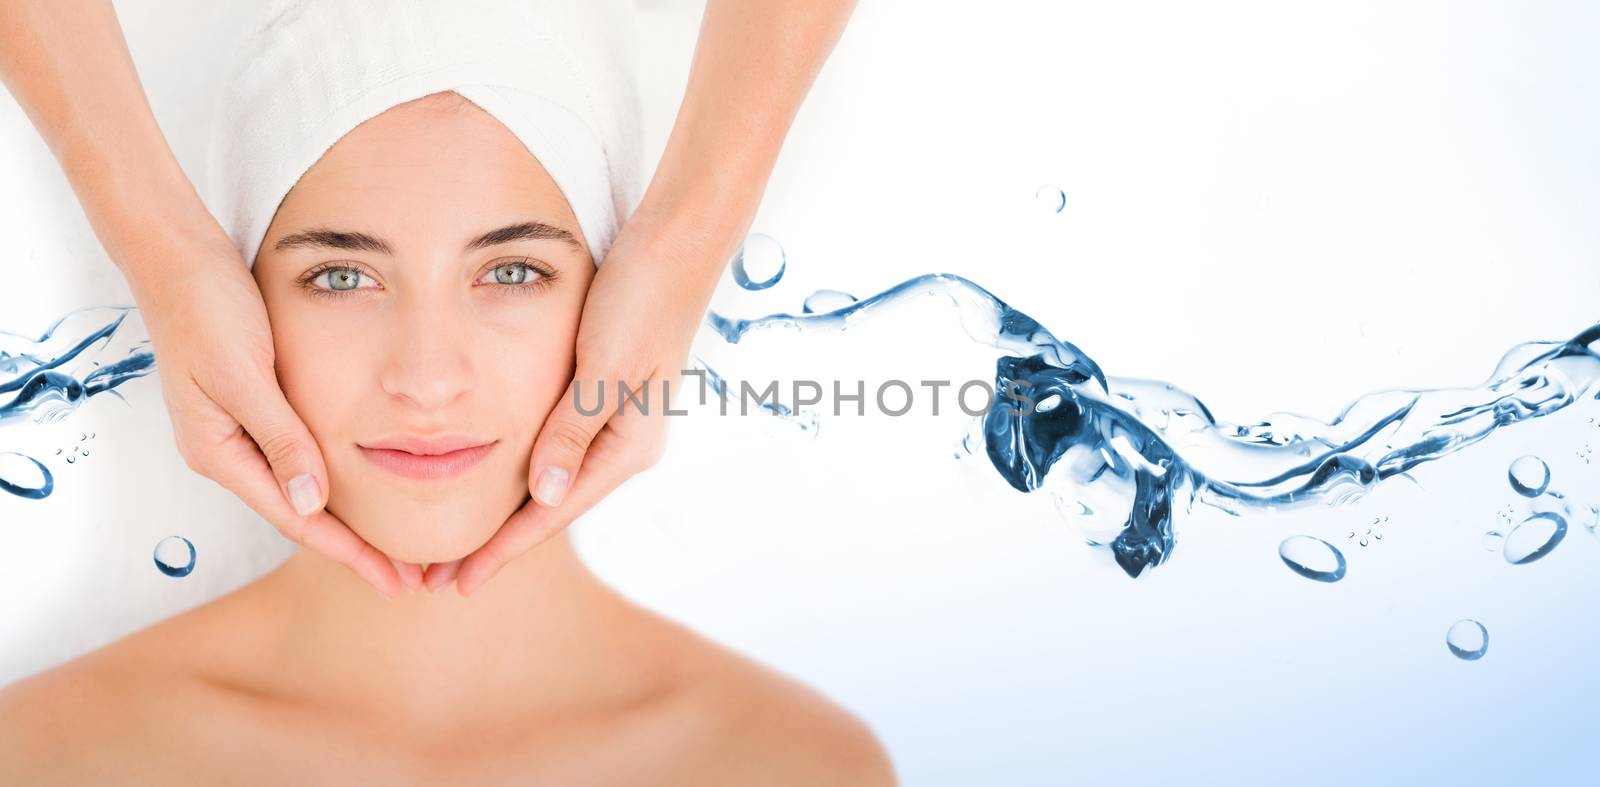 Water bubbling on white surface against attractive woman receiving facial massage at spa center